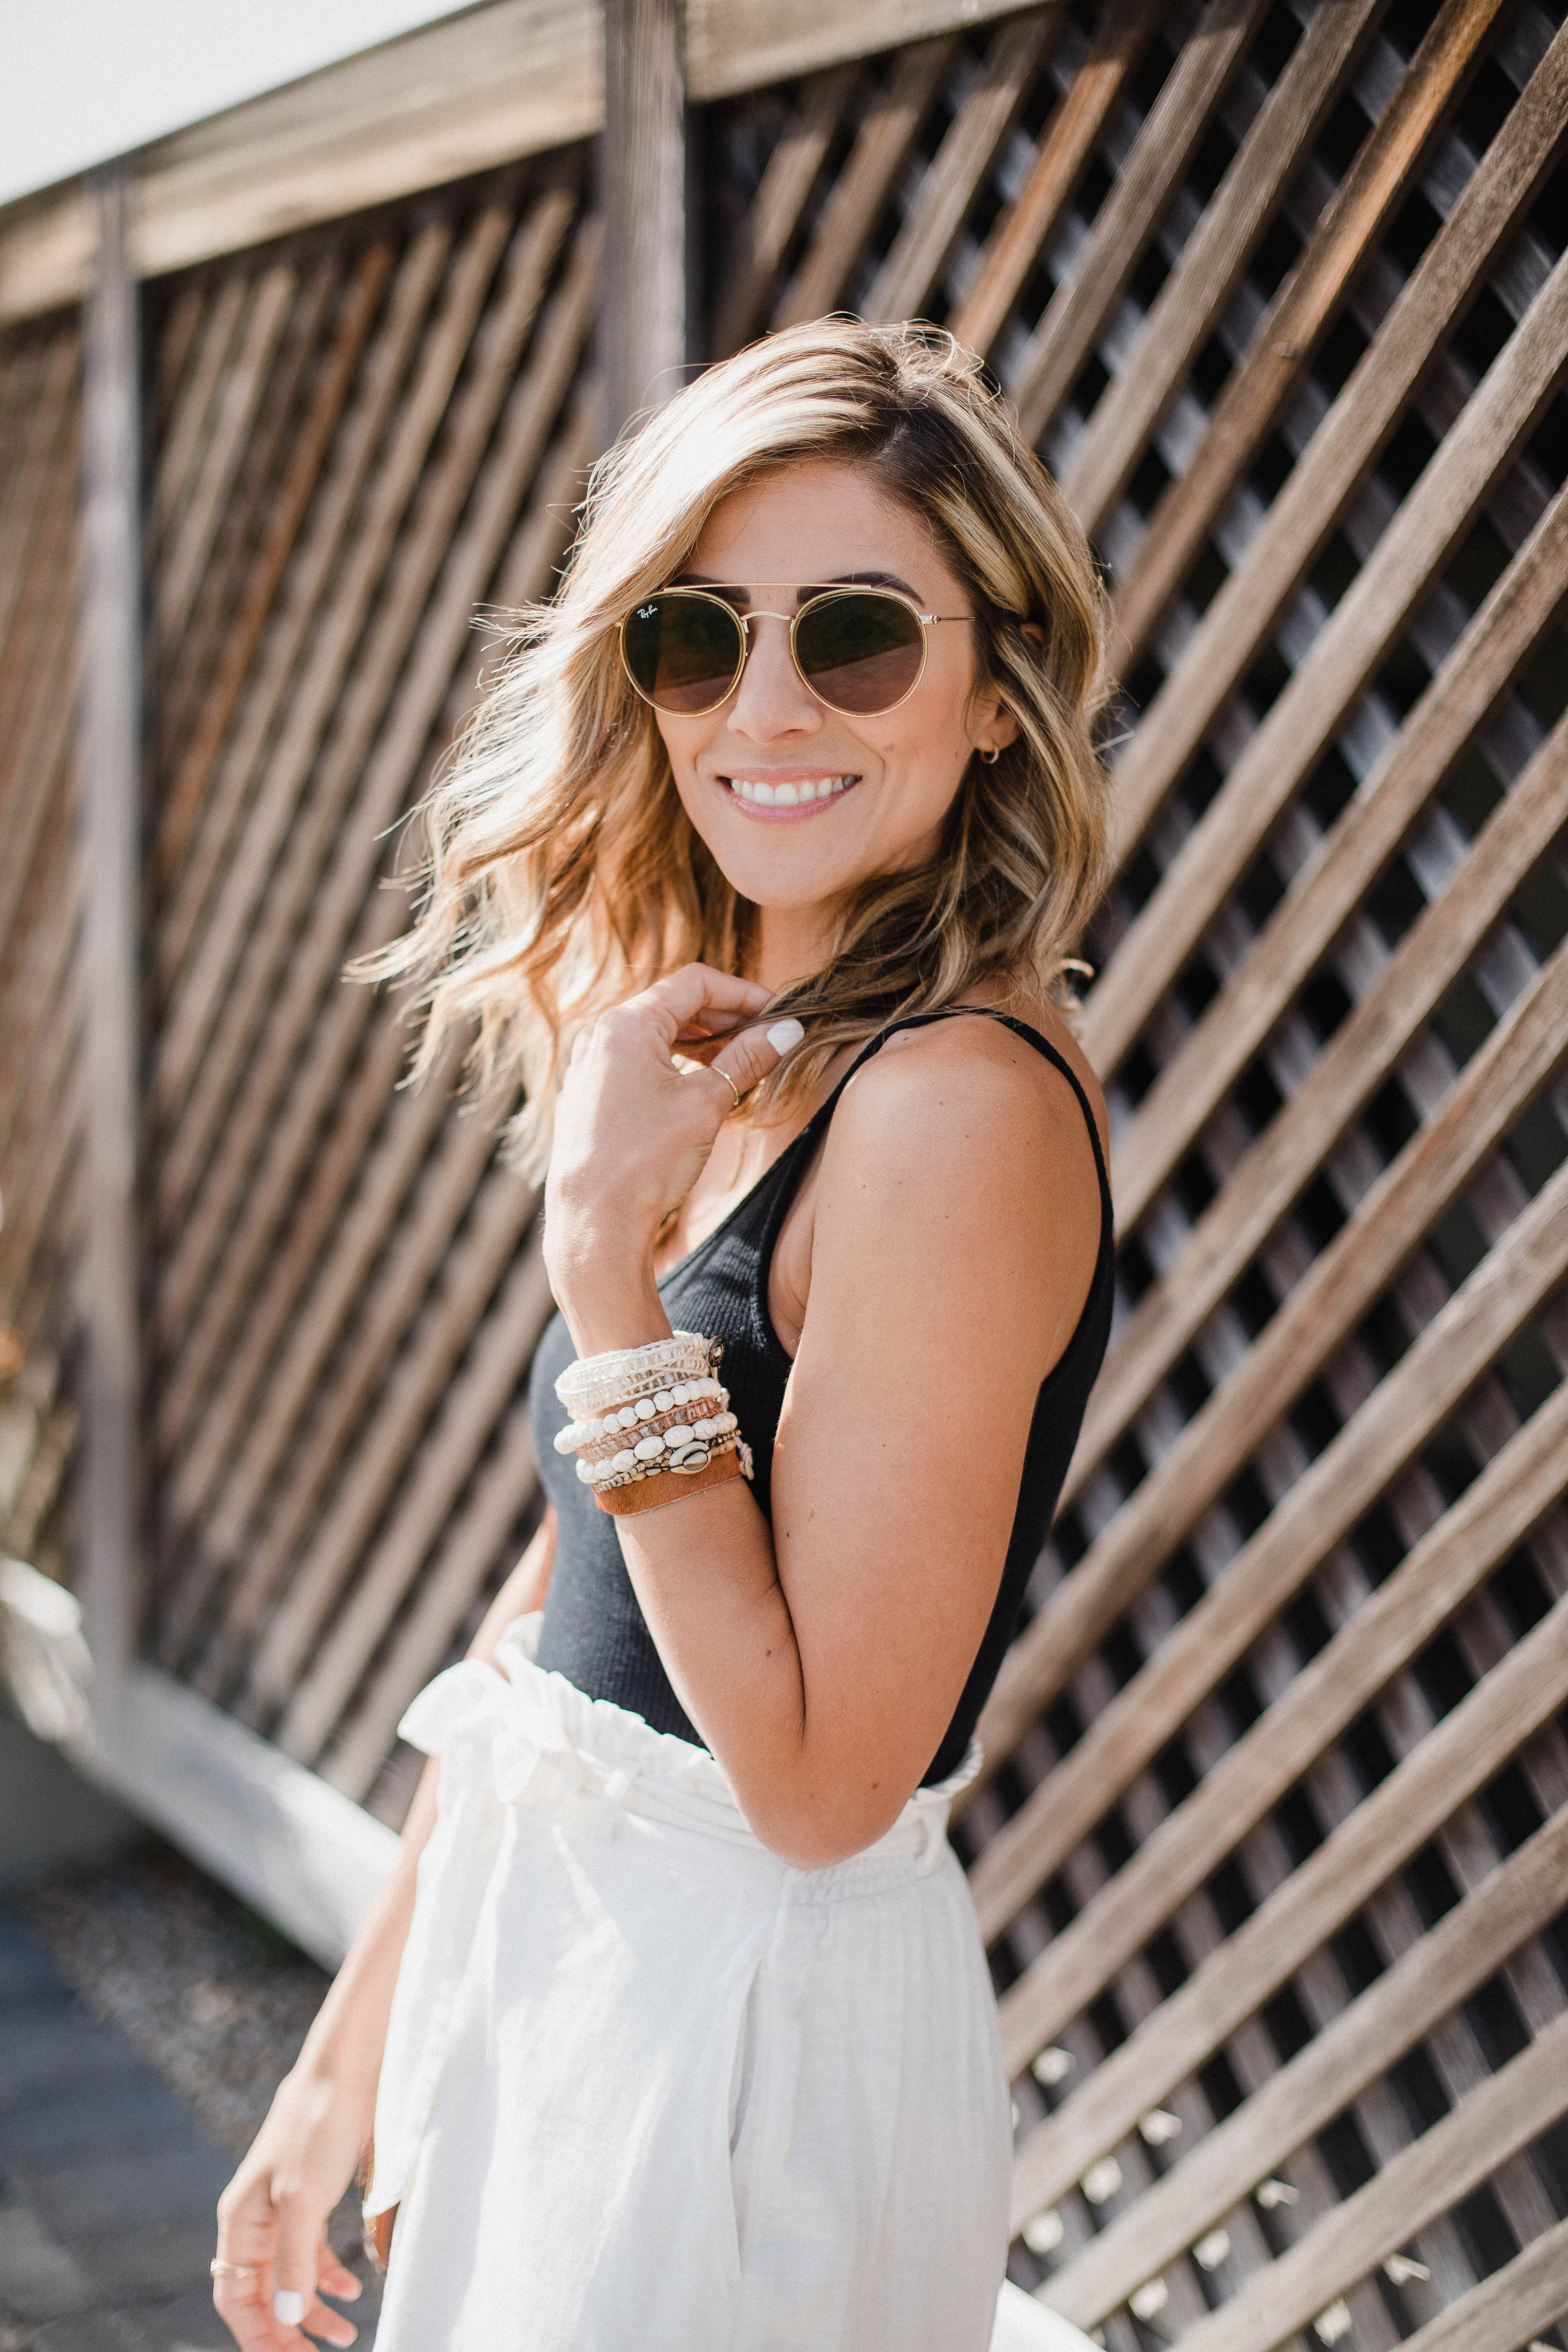 Connecticut life and style blogger Lauren McBride shares her current favorite boho accessories from Victoria Emerson, and how they impact a simple outfit.